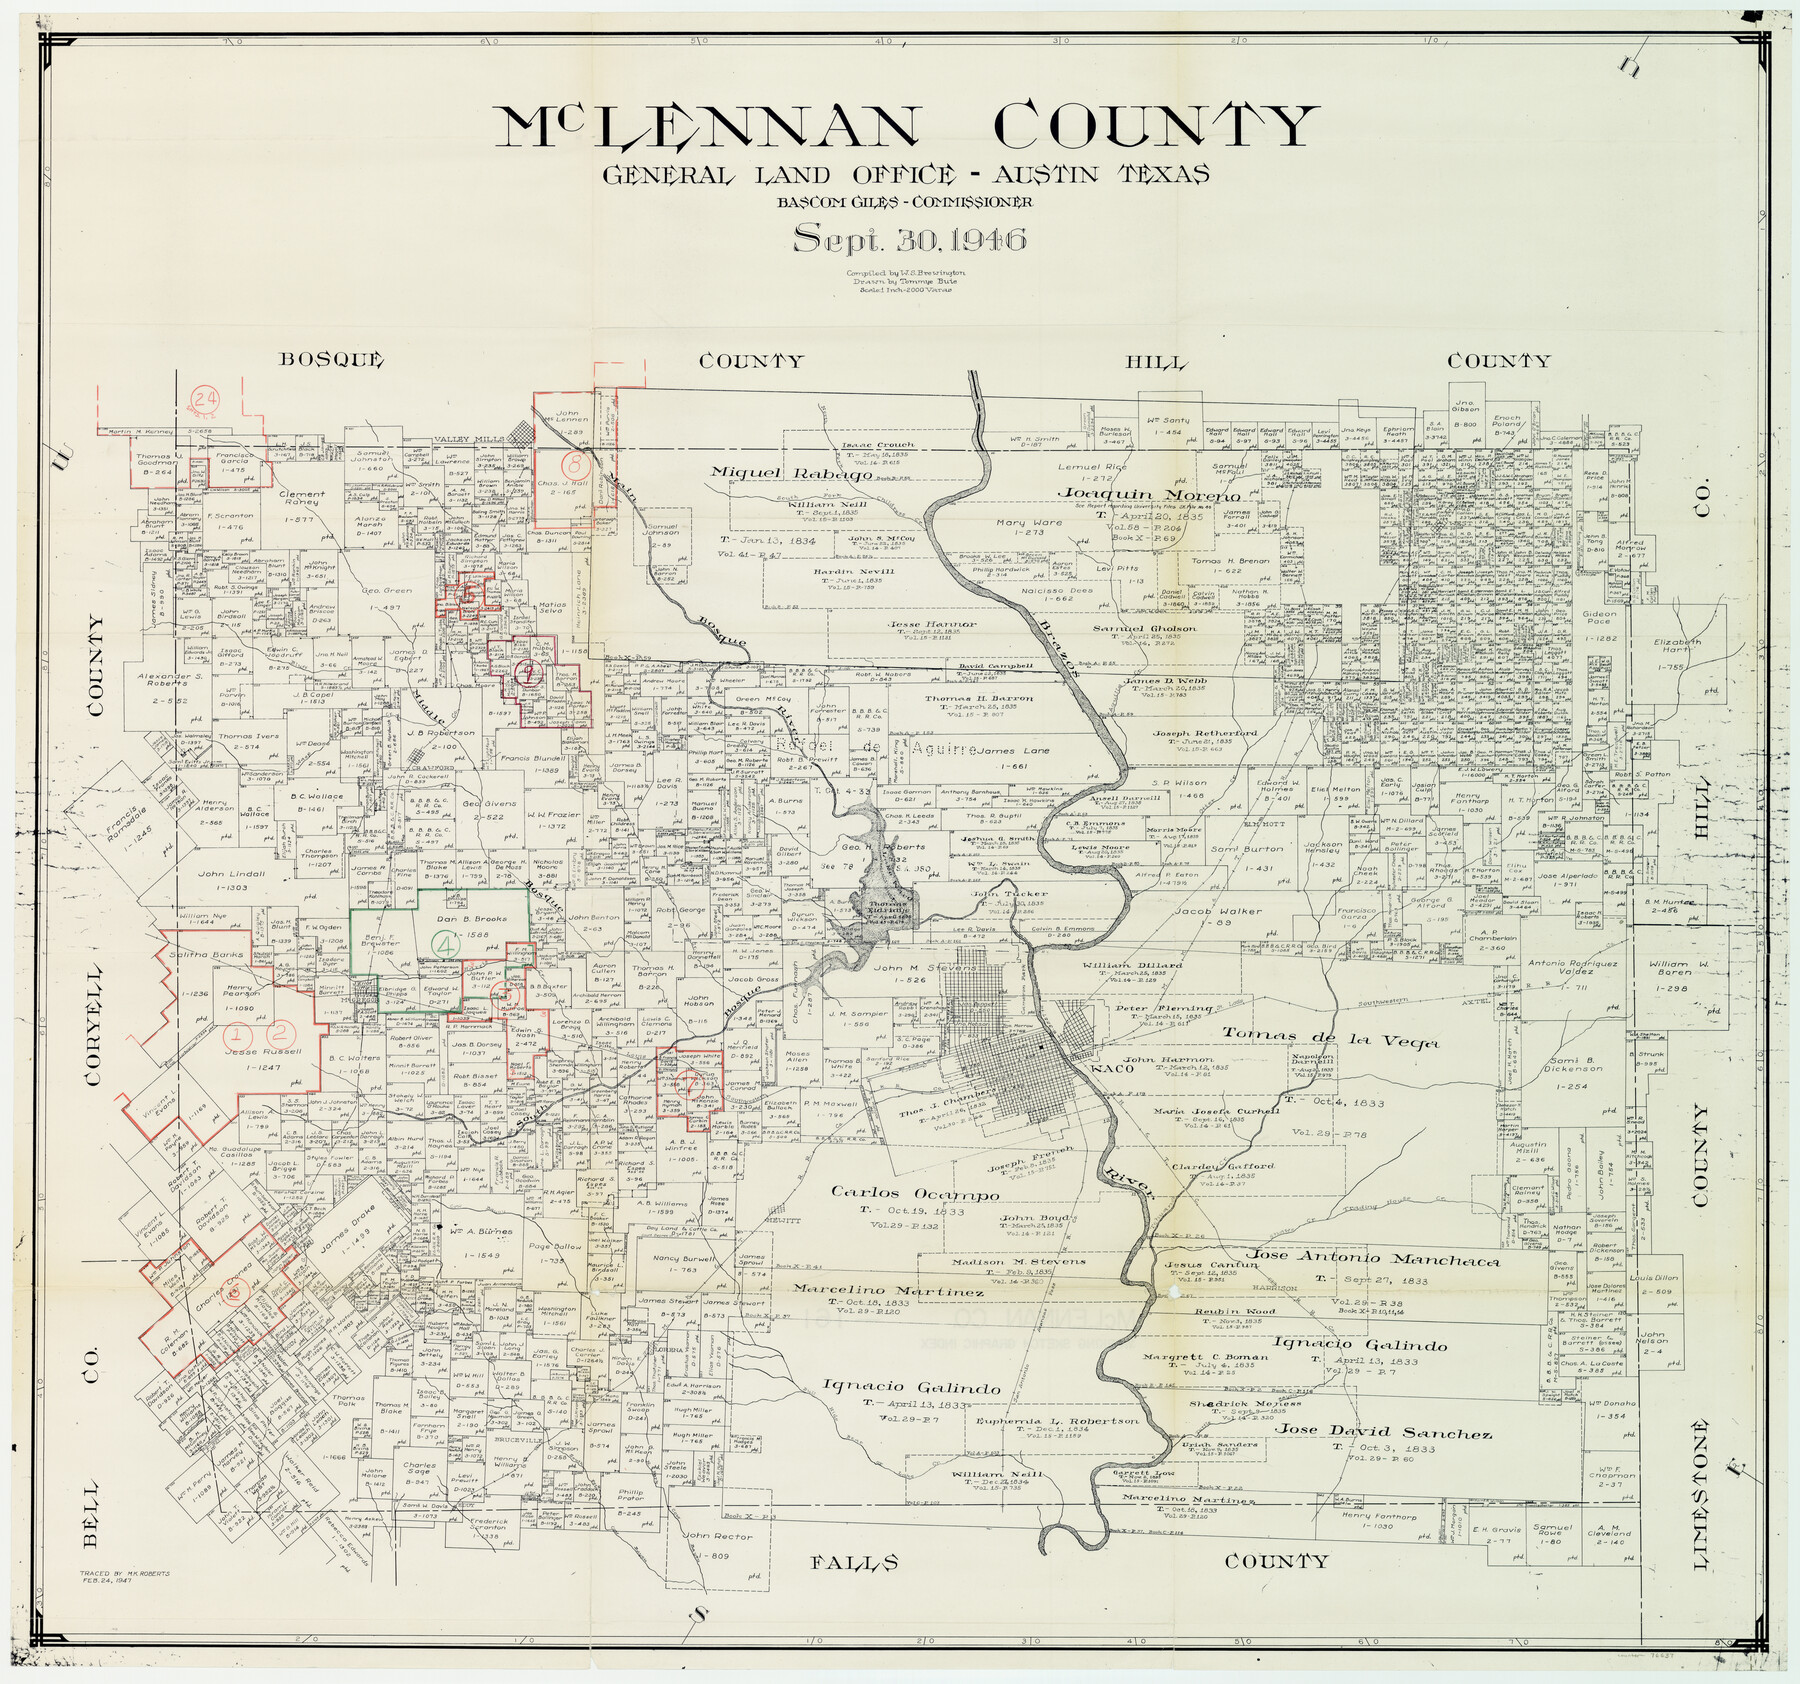 76637, McLennan County Working Sketch Graphic Index, General Map Collection